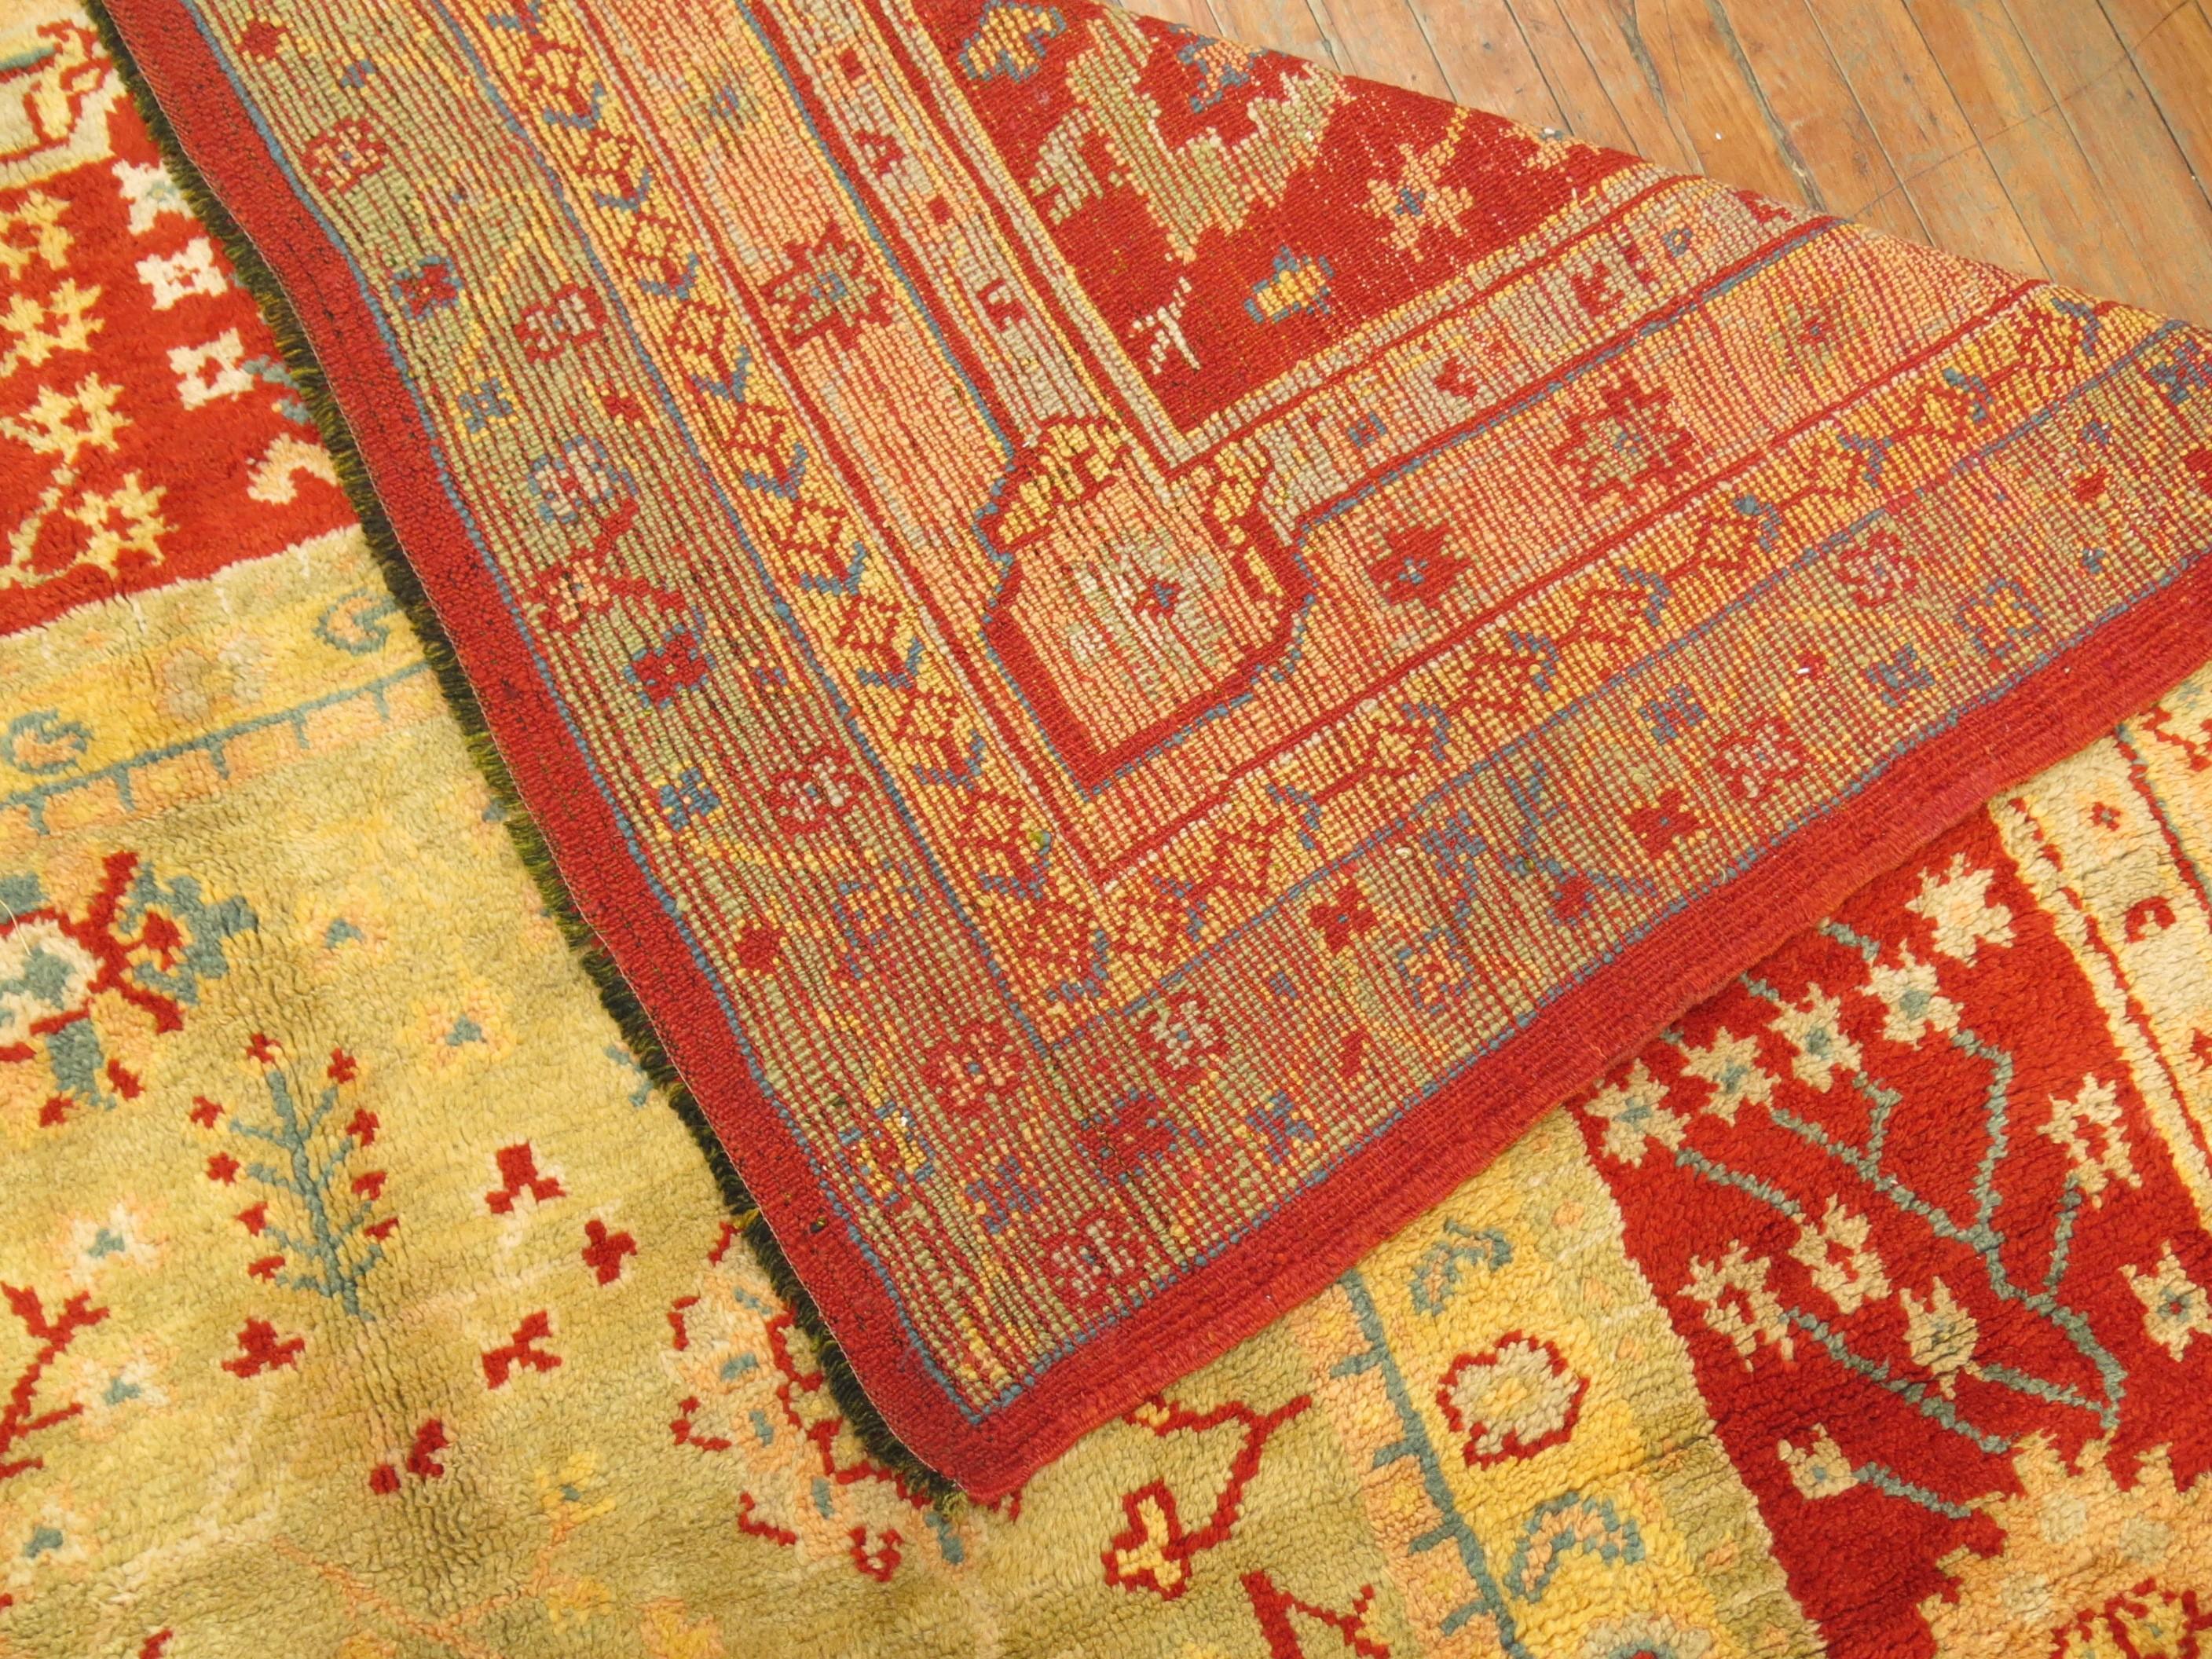 An early 20th century colorful palace size full pile condition antique Turkish Oushak rug.
The texture and full pile condition on this rug is un-parallel. Absolutely no issues with the rug as previous owner kept it in a well preserved state for long